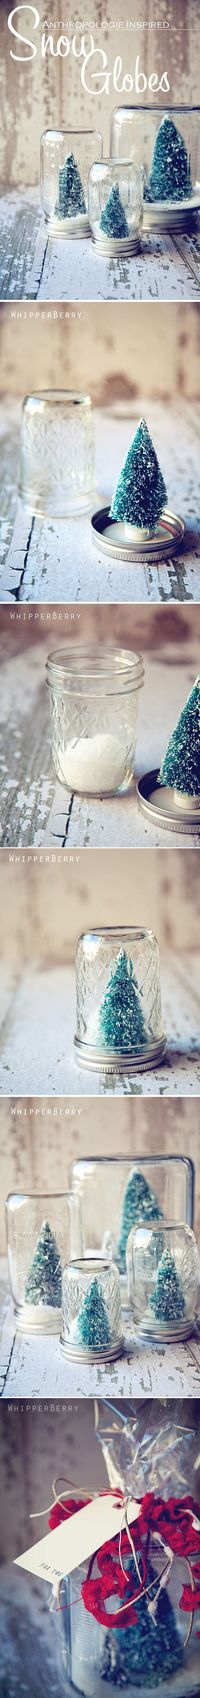 I love this idea -- snowglobes made out of mason or ball jars!